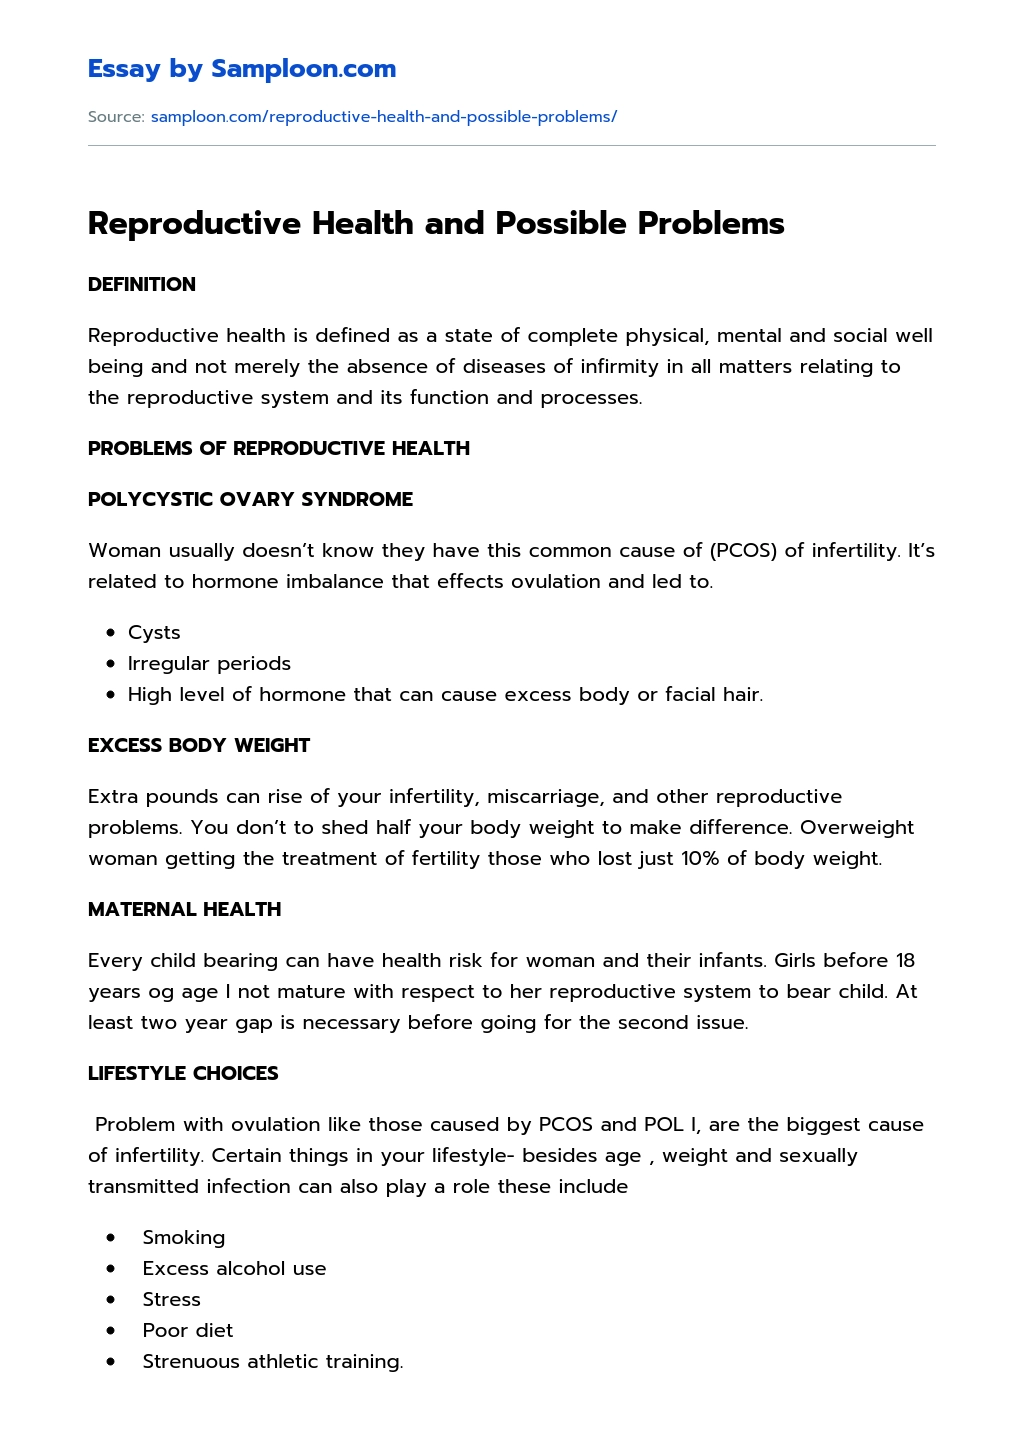 Reproductive Health and Possible Problems essay